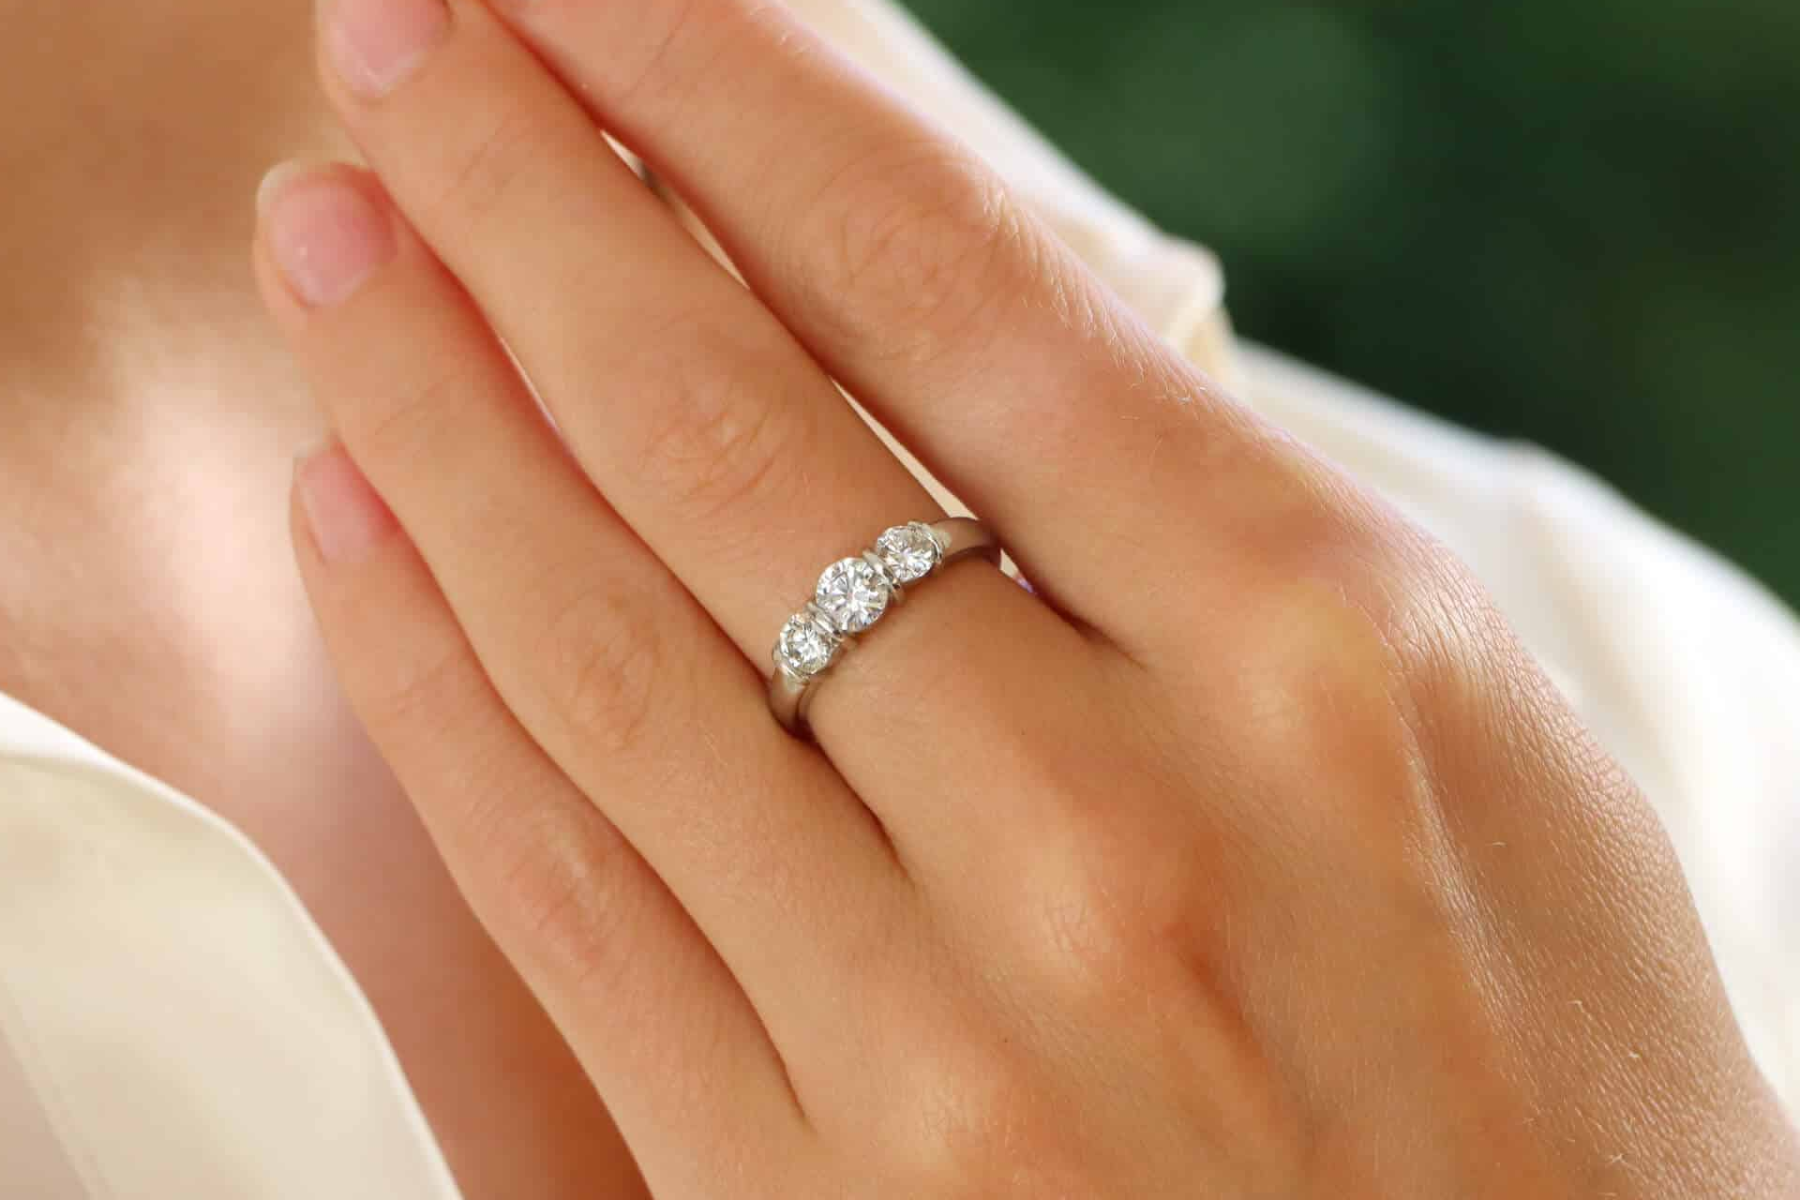 A woman has a ring with a bar setting on her middle finger